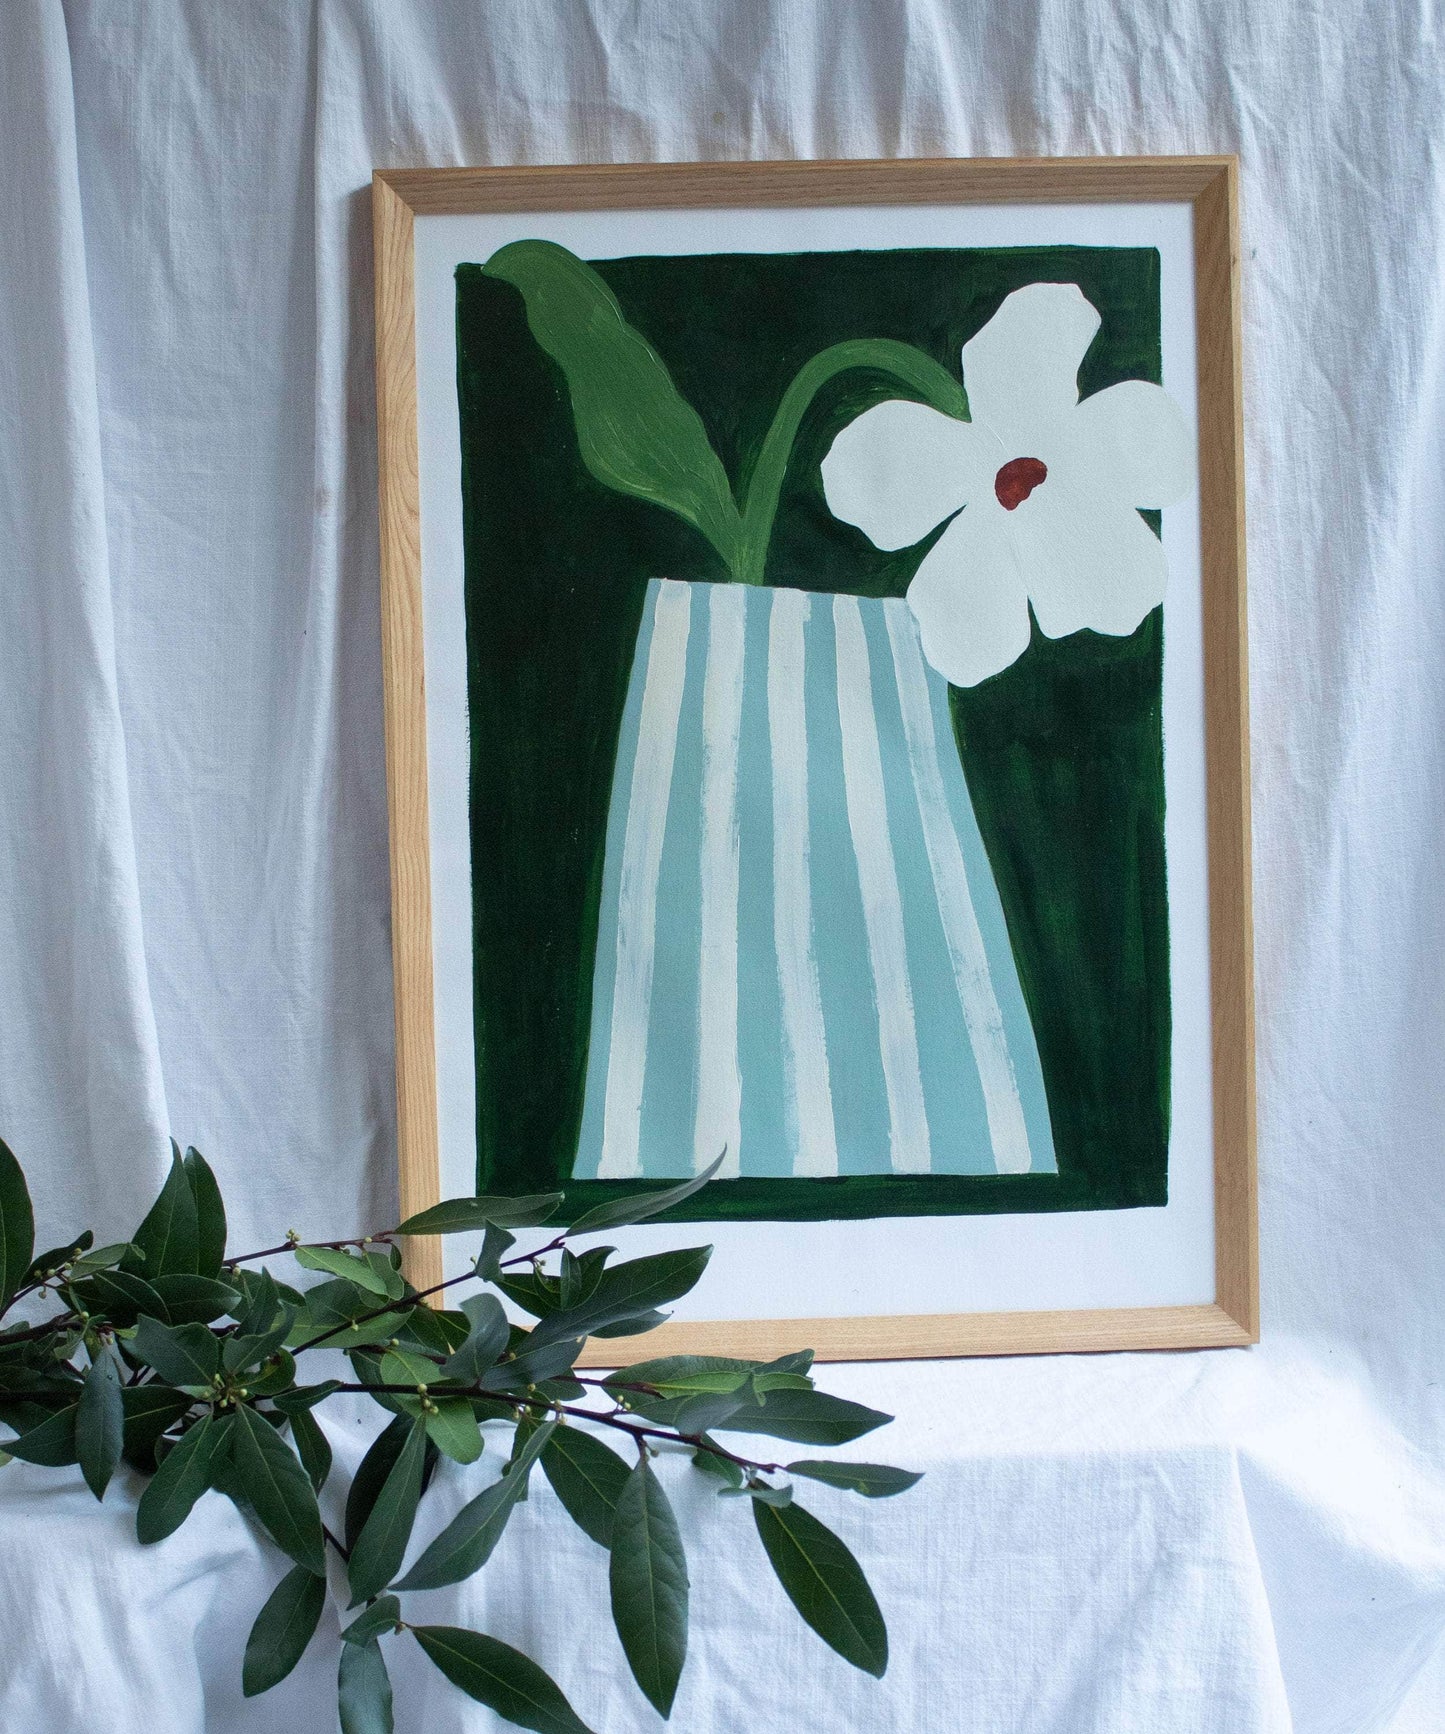 Green and mint vase- Original painting